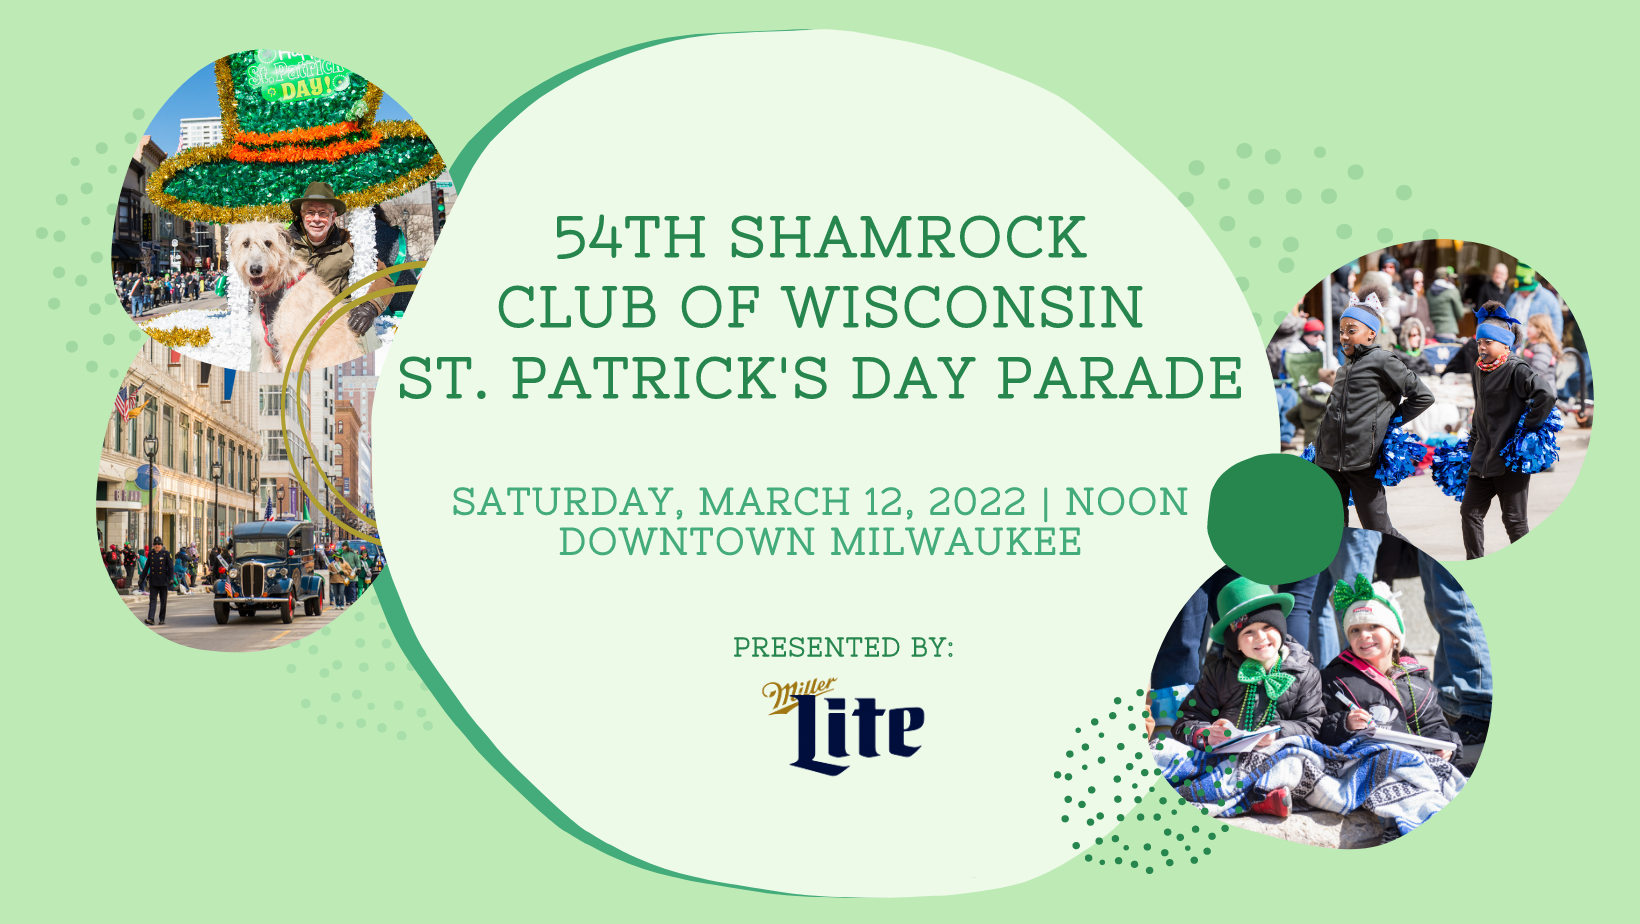 We look forward to seeing you at the 54th Shamrock Club of Wisconsin St